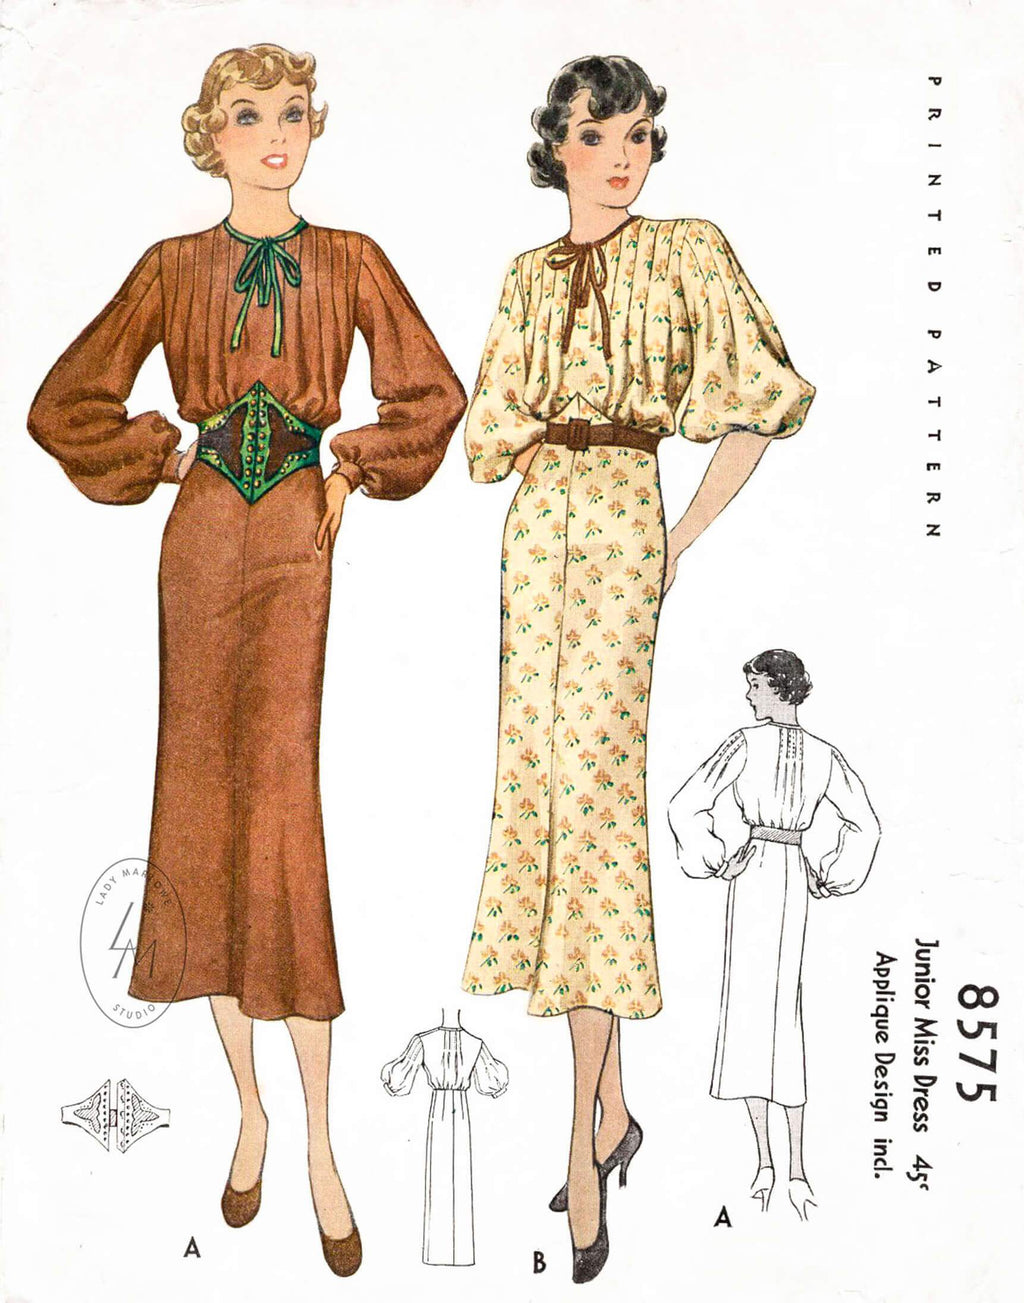 1930s 1935 McCall 8575 peasant blouse dress wide girdle belt vintage sewing pattern repro